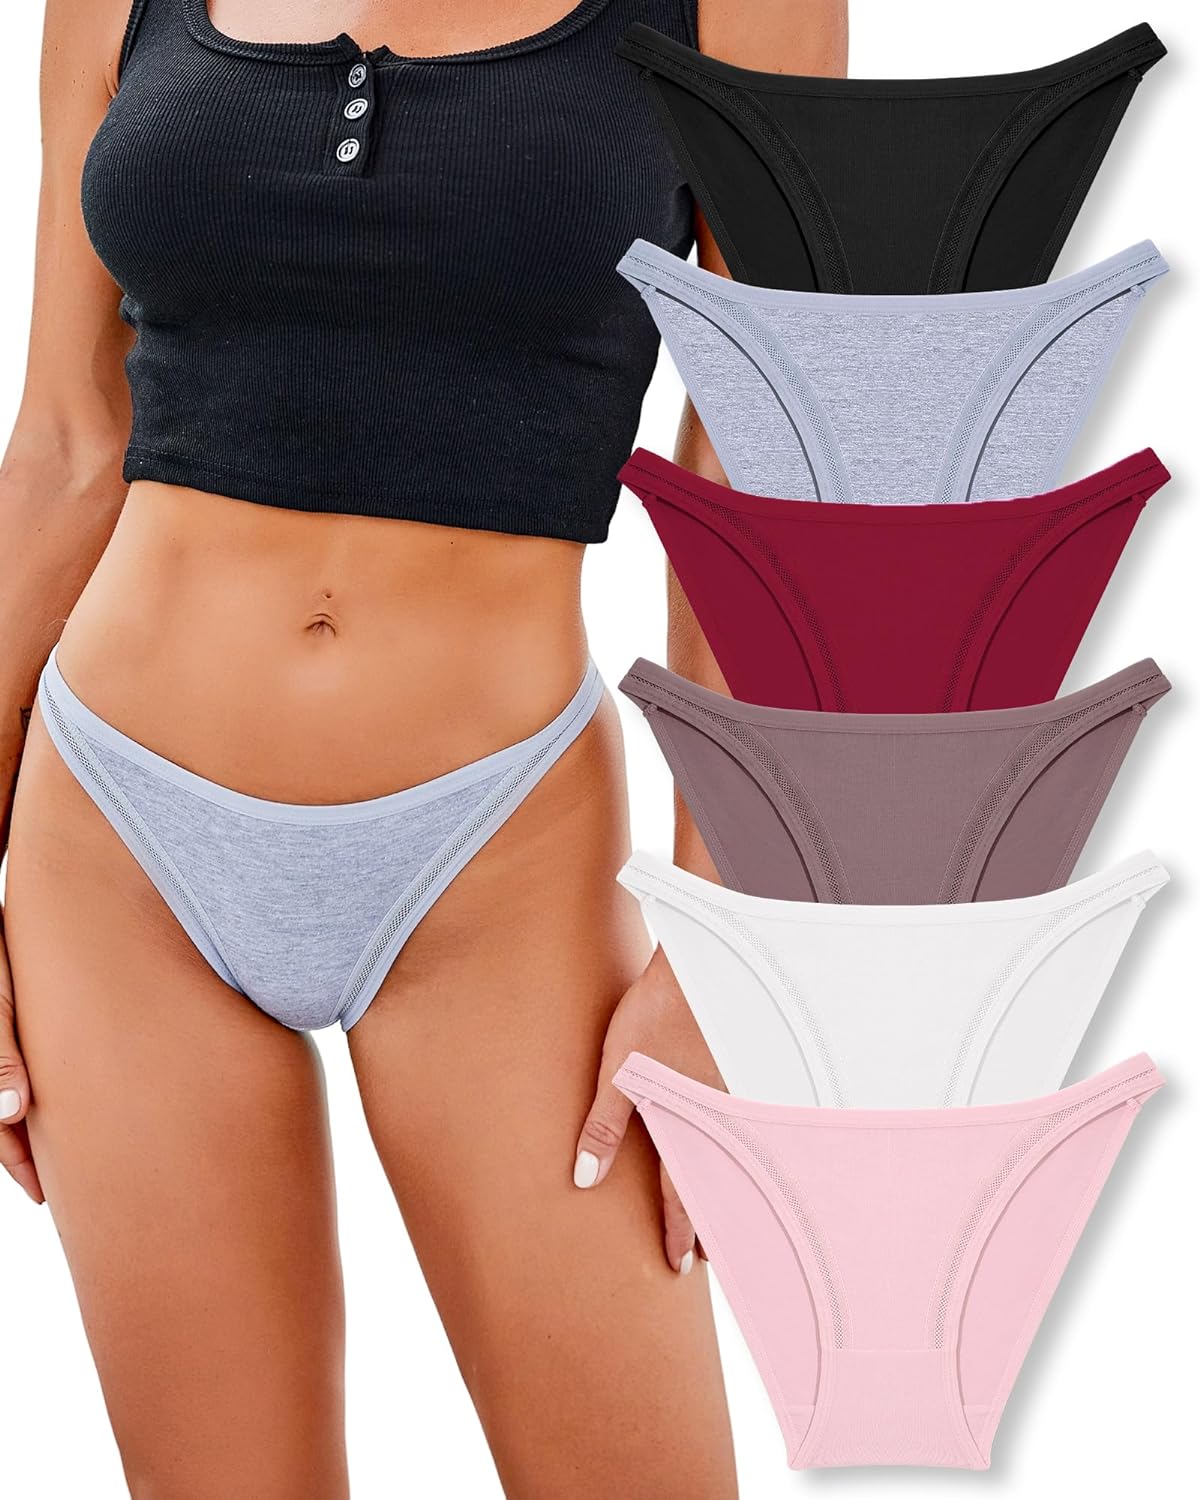 ANZERMIX Women's Breathable Cotton Tong Panties Pack of 6 (Size M